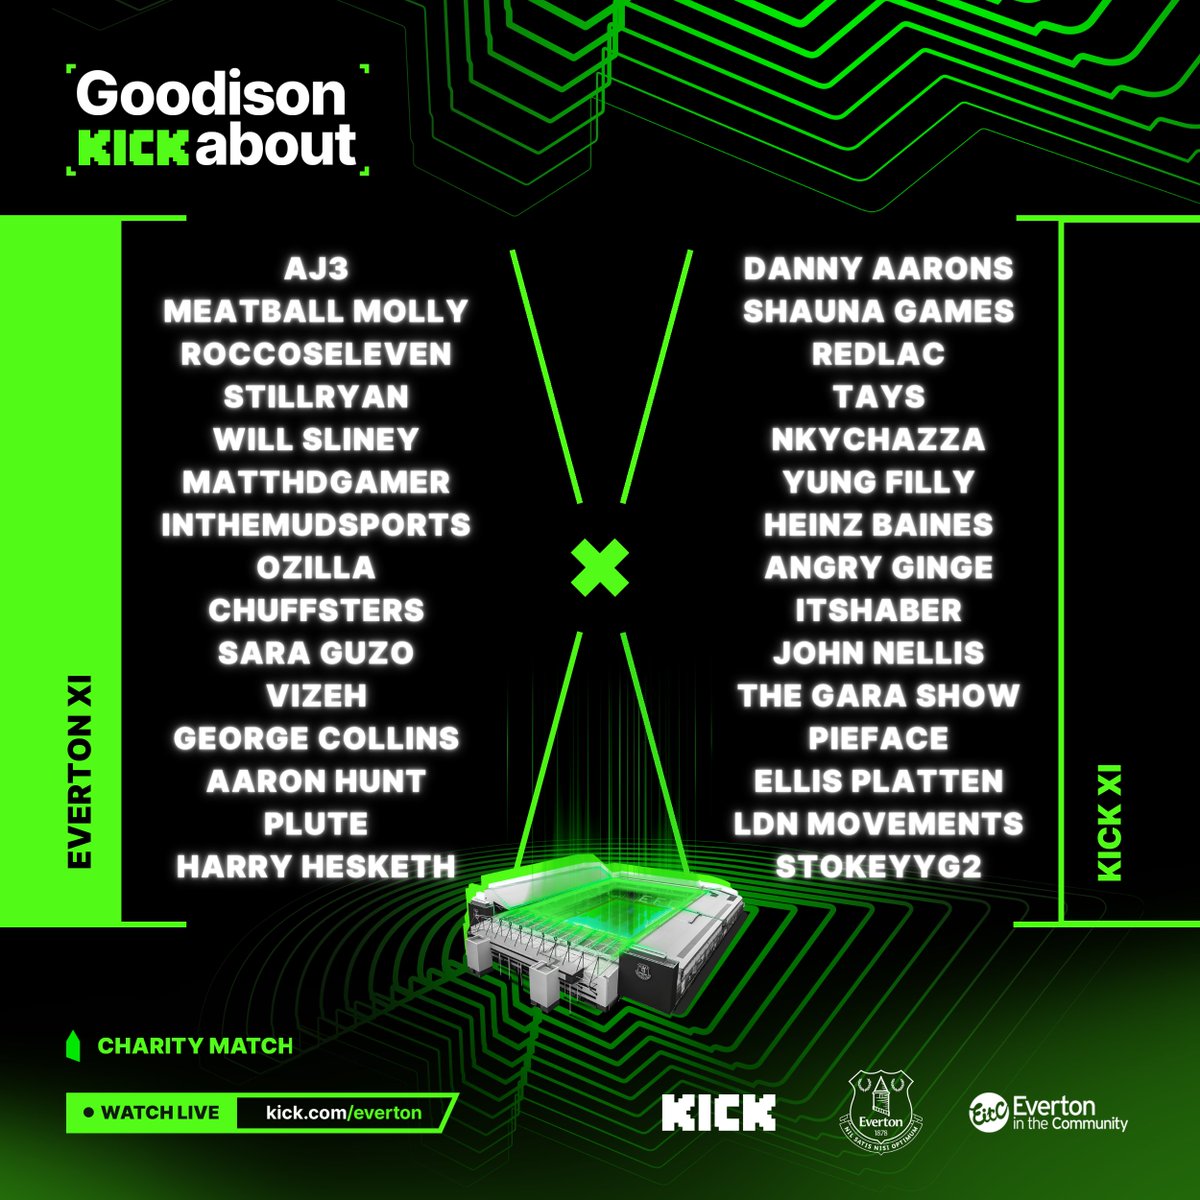 Matchday squads for the #GoodisonKICKabout charity match are here! Which side are you backing? 📋

Catch all of the action live from 5.30pm on Saturday on our official @KICKStreaming channel! 📺

Donate to @EITC at evertoninthecommunity.org/donate 💙